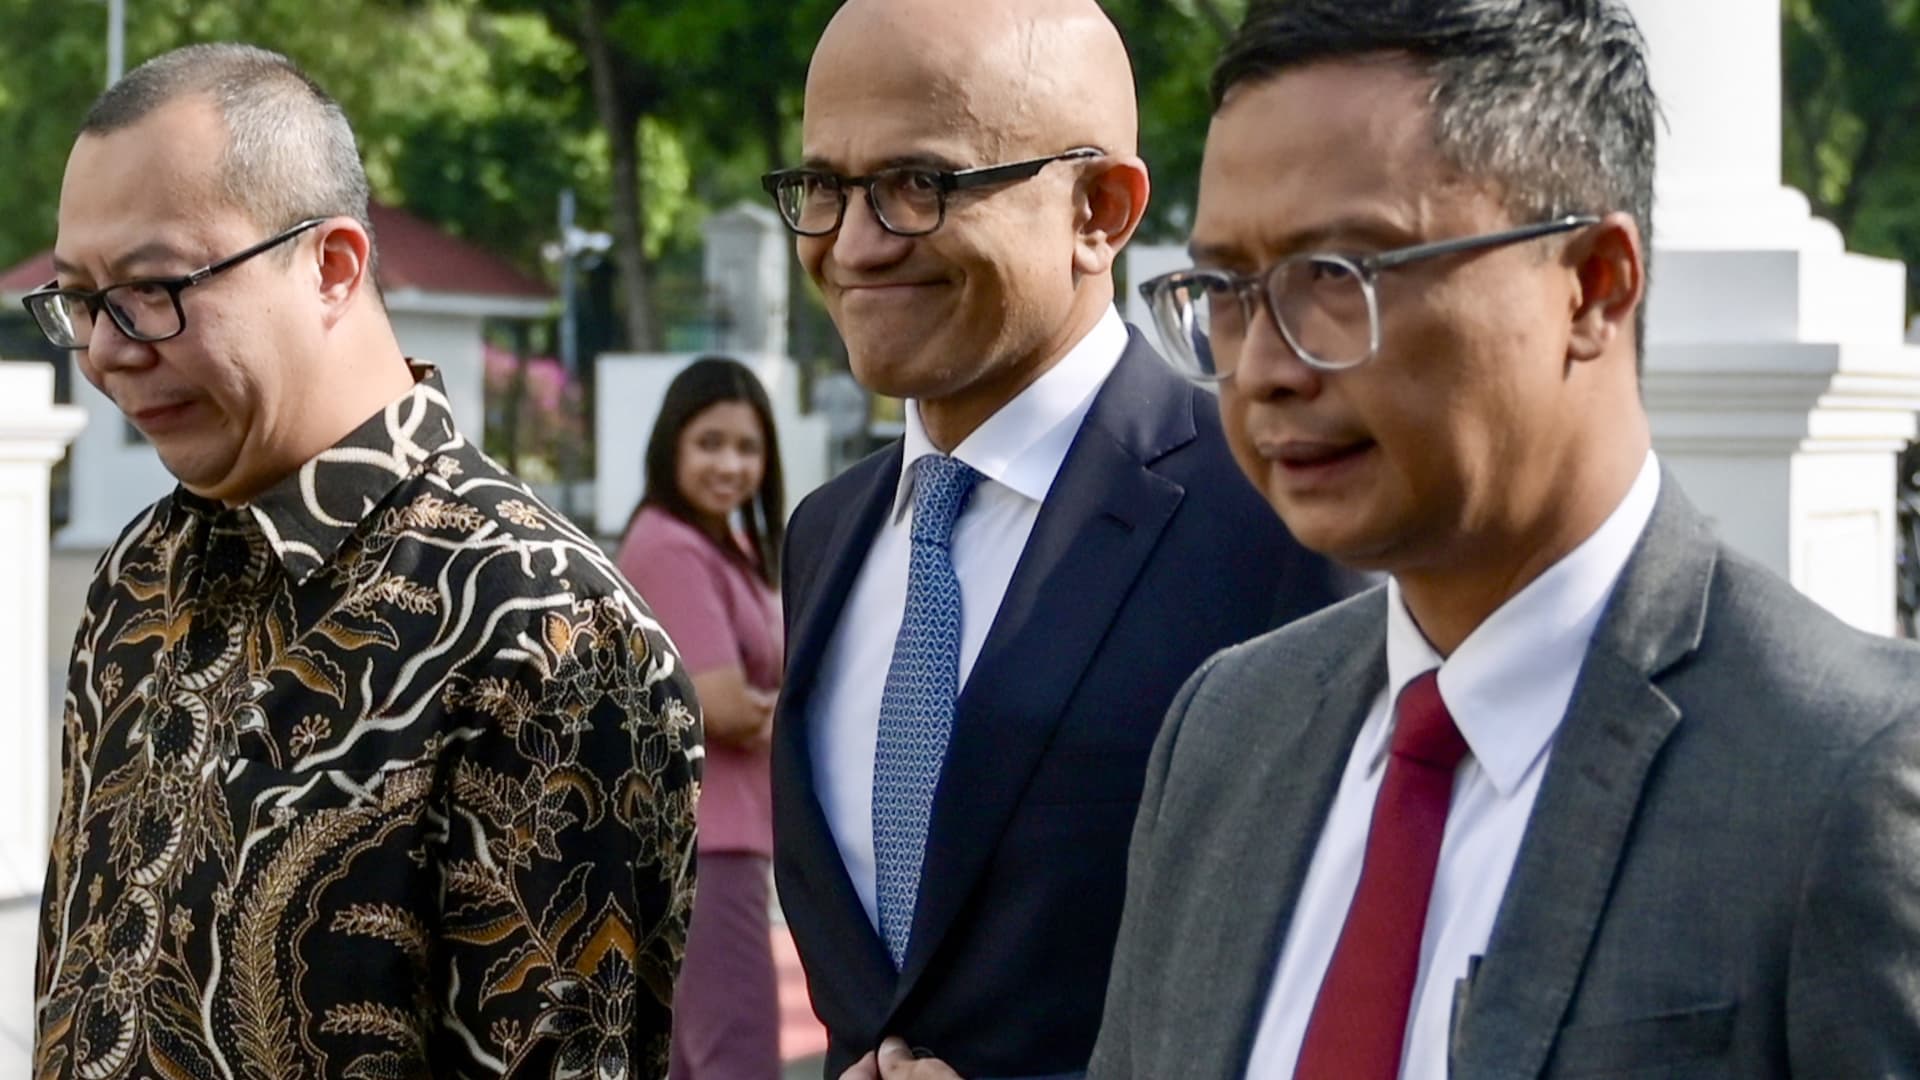 Microsoft to invest .7 billion into AI infrastructure in Indonesia, CEO Satya Nadella says